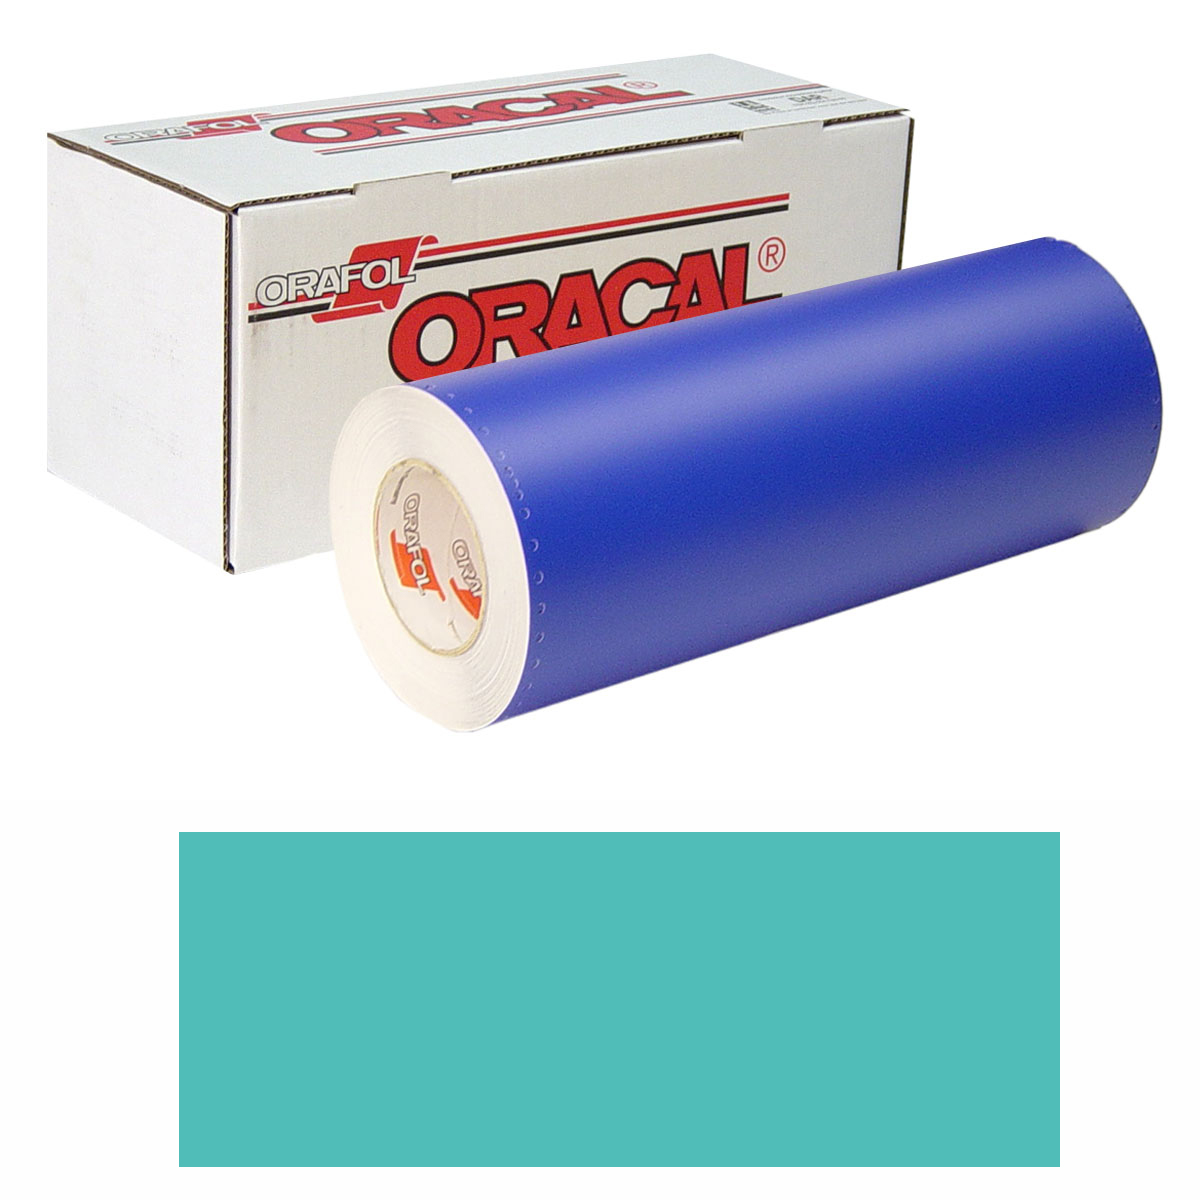 ORACAL 8300 Unp 24in X 10yd 054 Turquoise